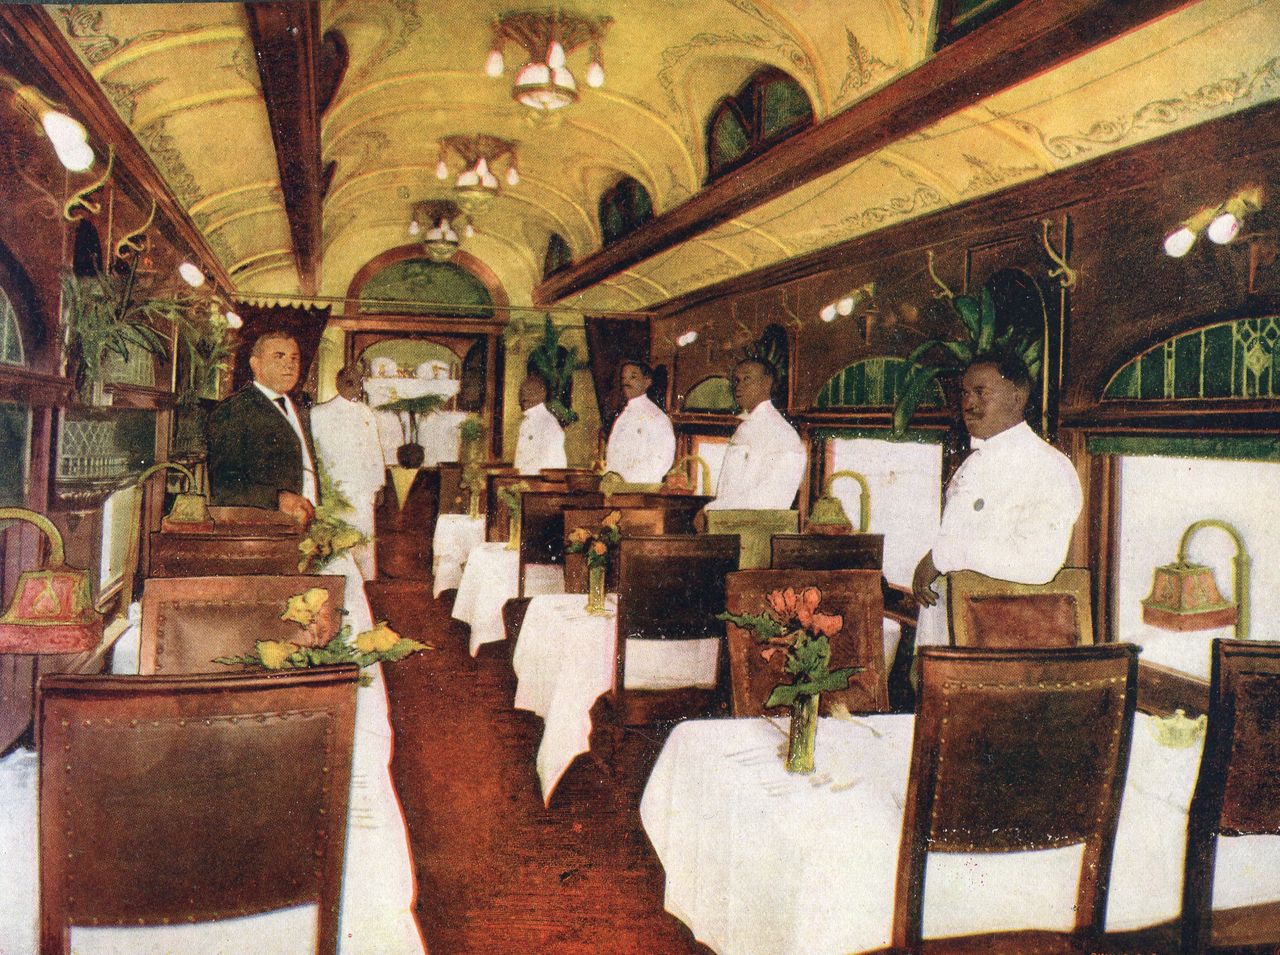 The luxurious interior of an Union Pacific Oregon Short Line dining car, circa 1910